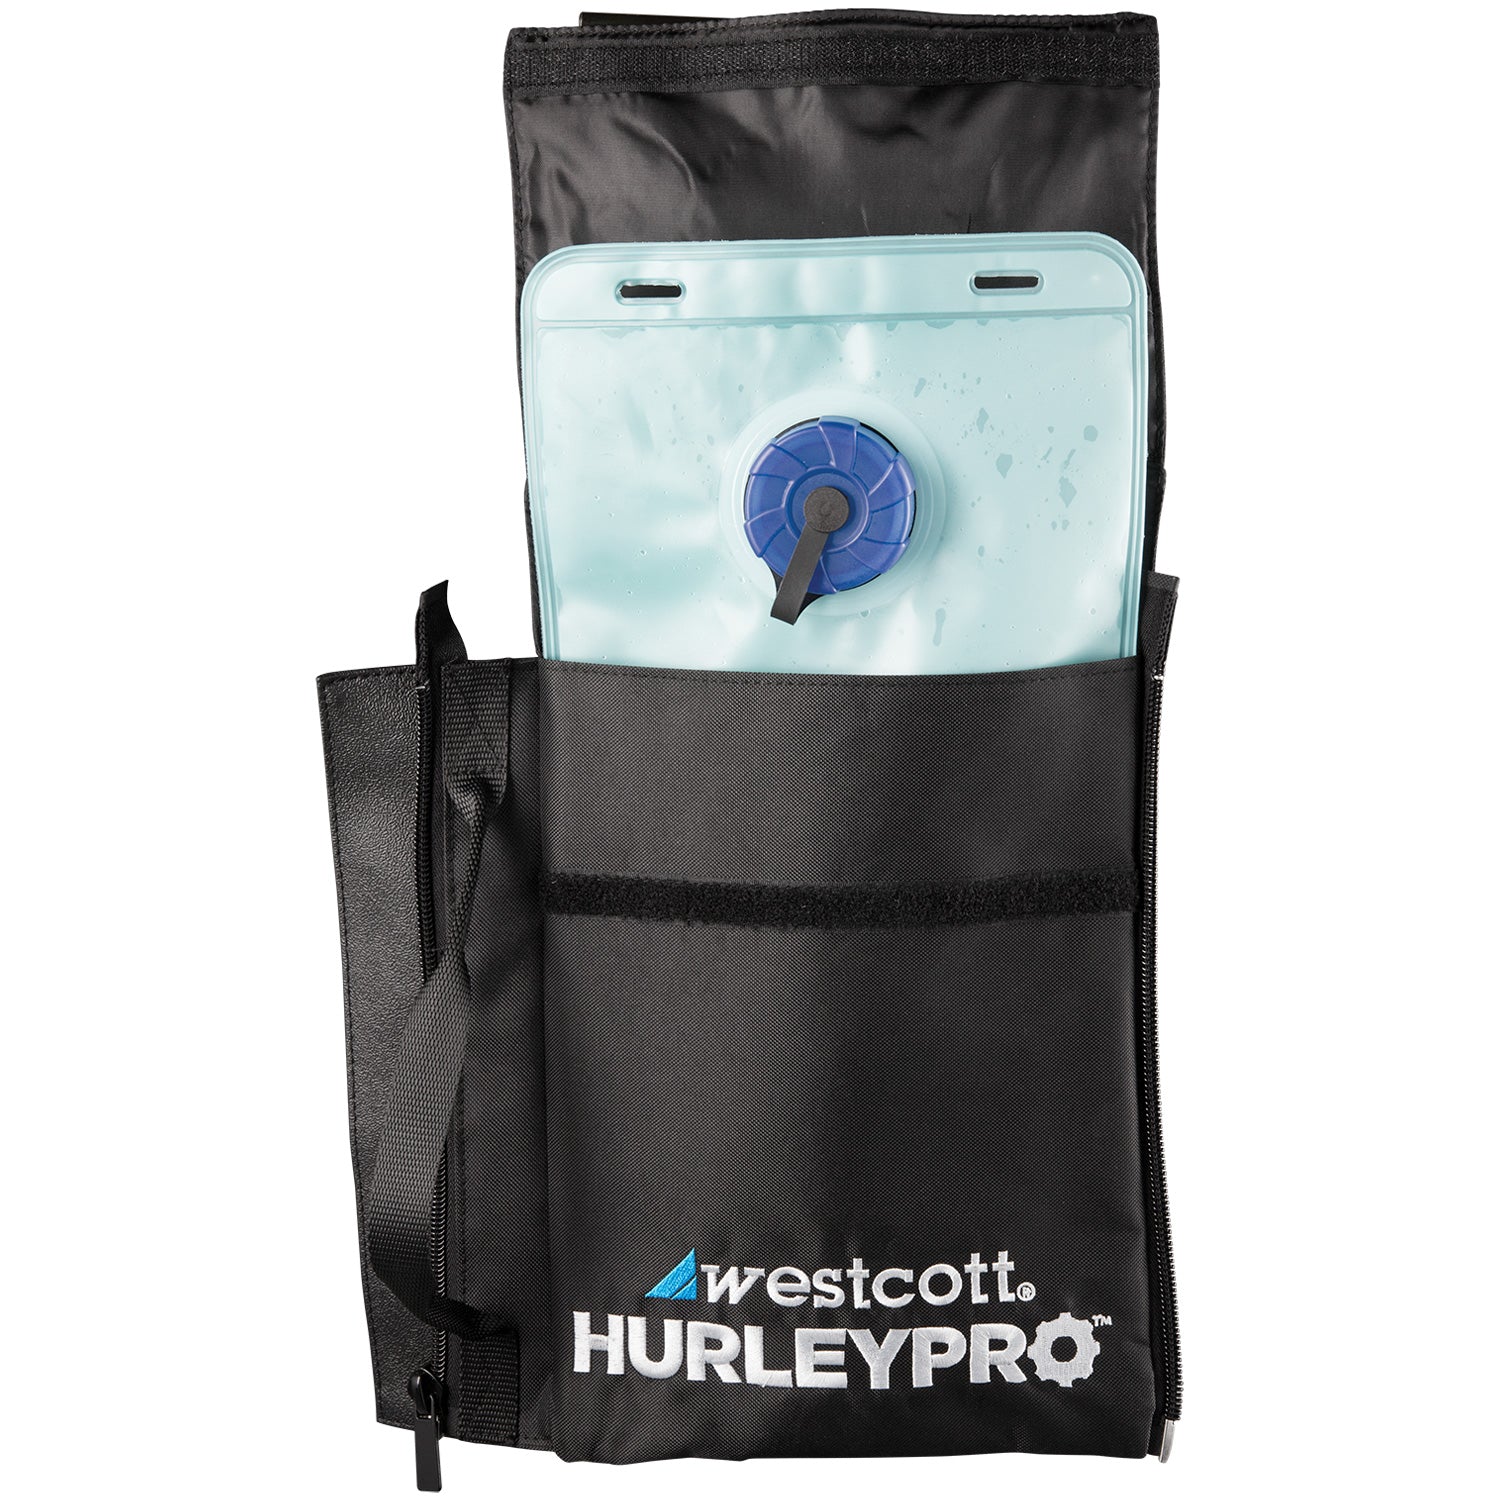 HurleyPro H2Pro Weight Bag (6-Pack)